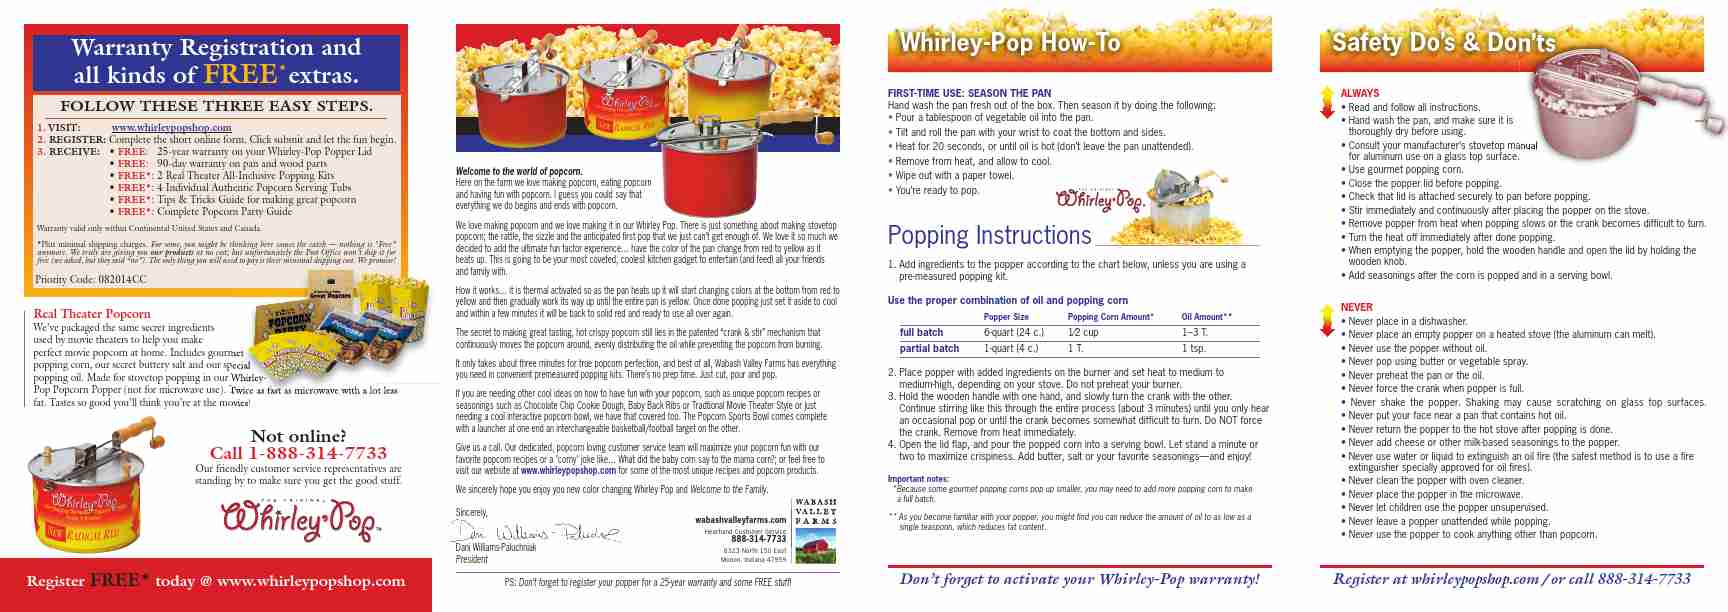 Whirley Pop Instruction Manual-page_pdf